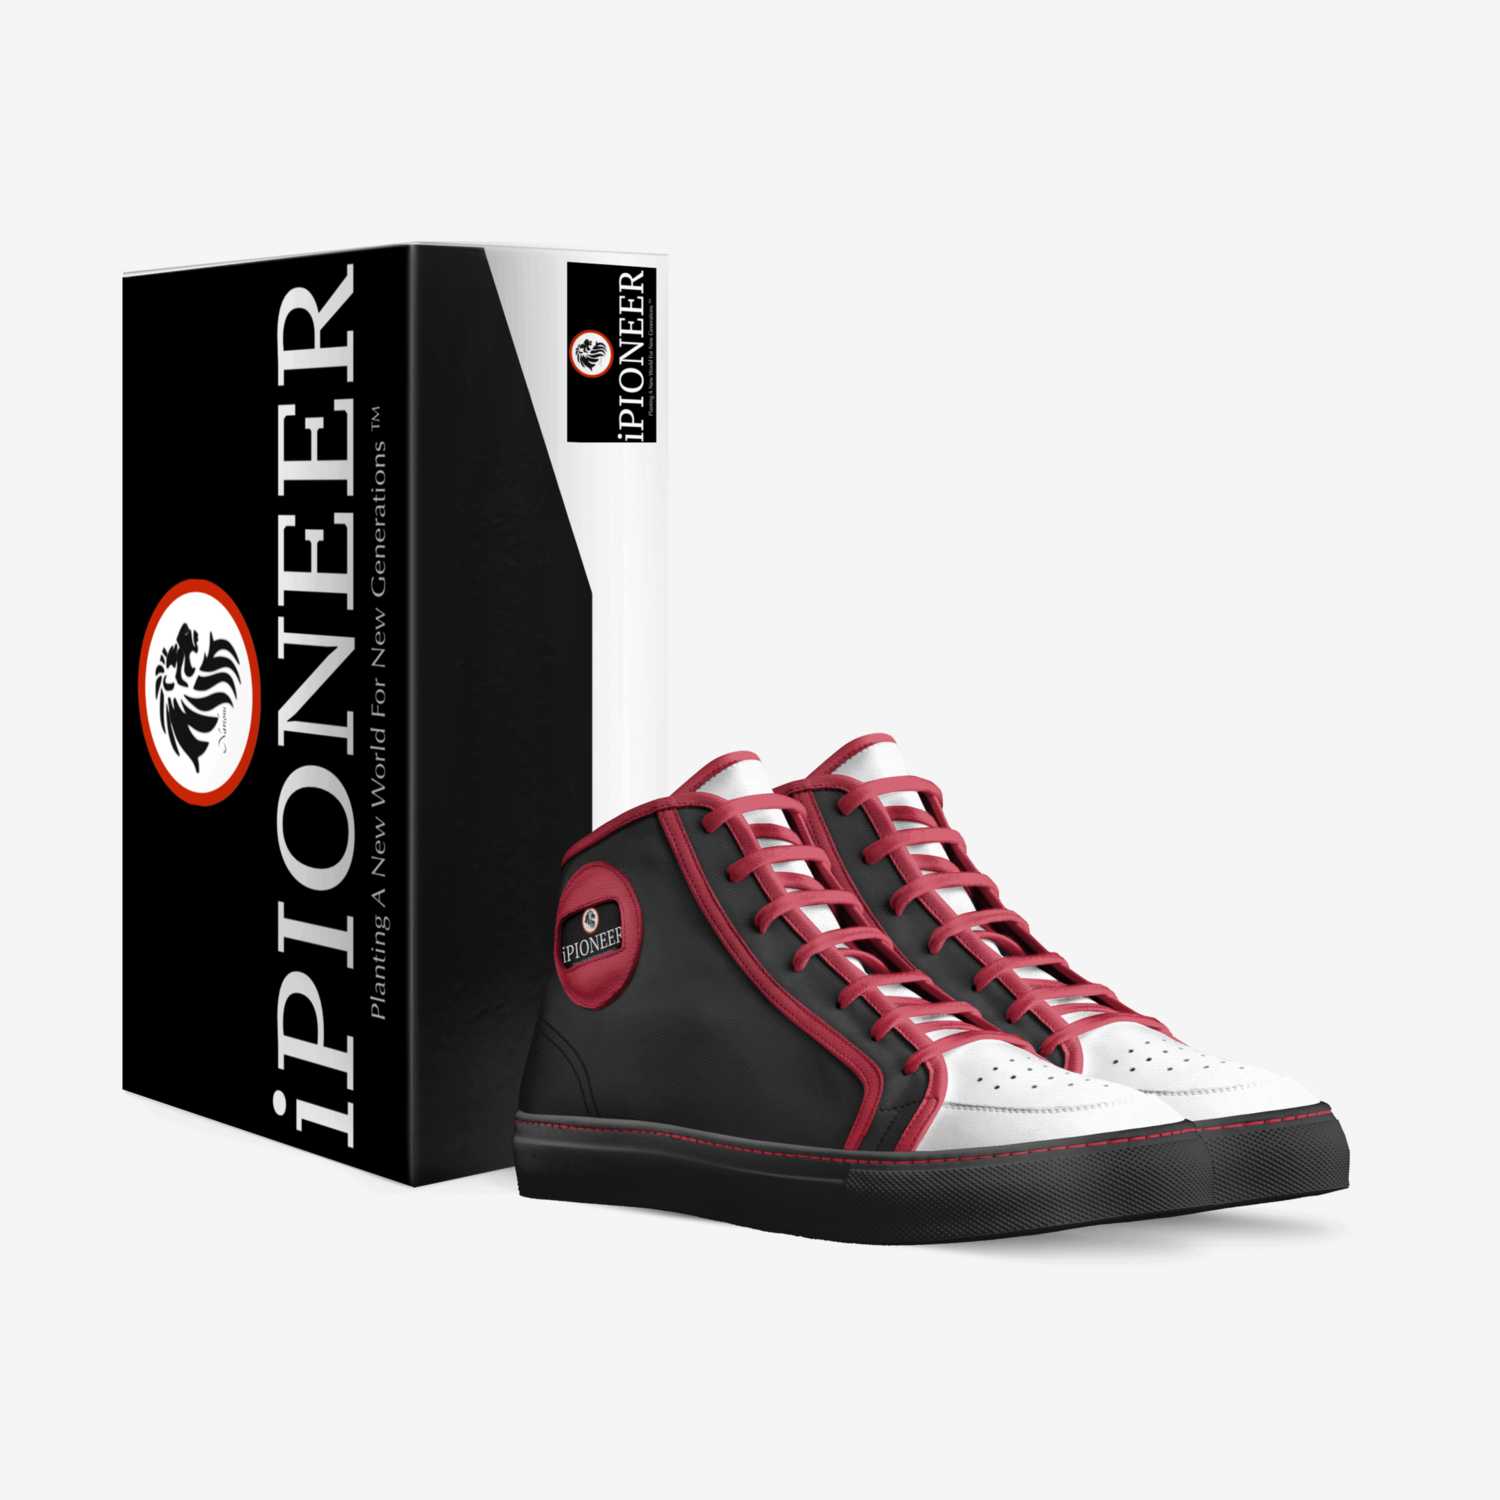 iPioneerGlory custom made in Italy shoes by Marlon D. Hester Sr. | Box view